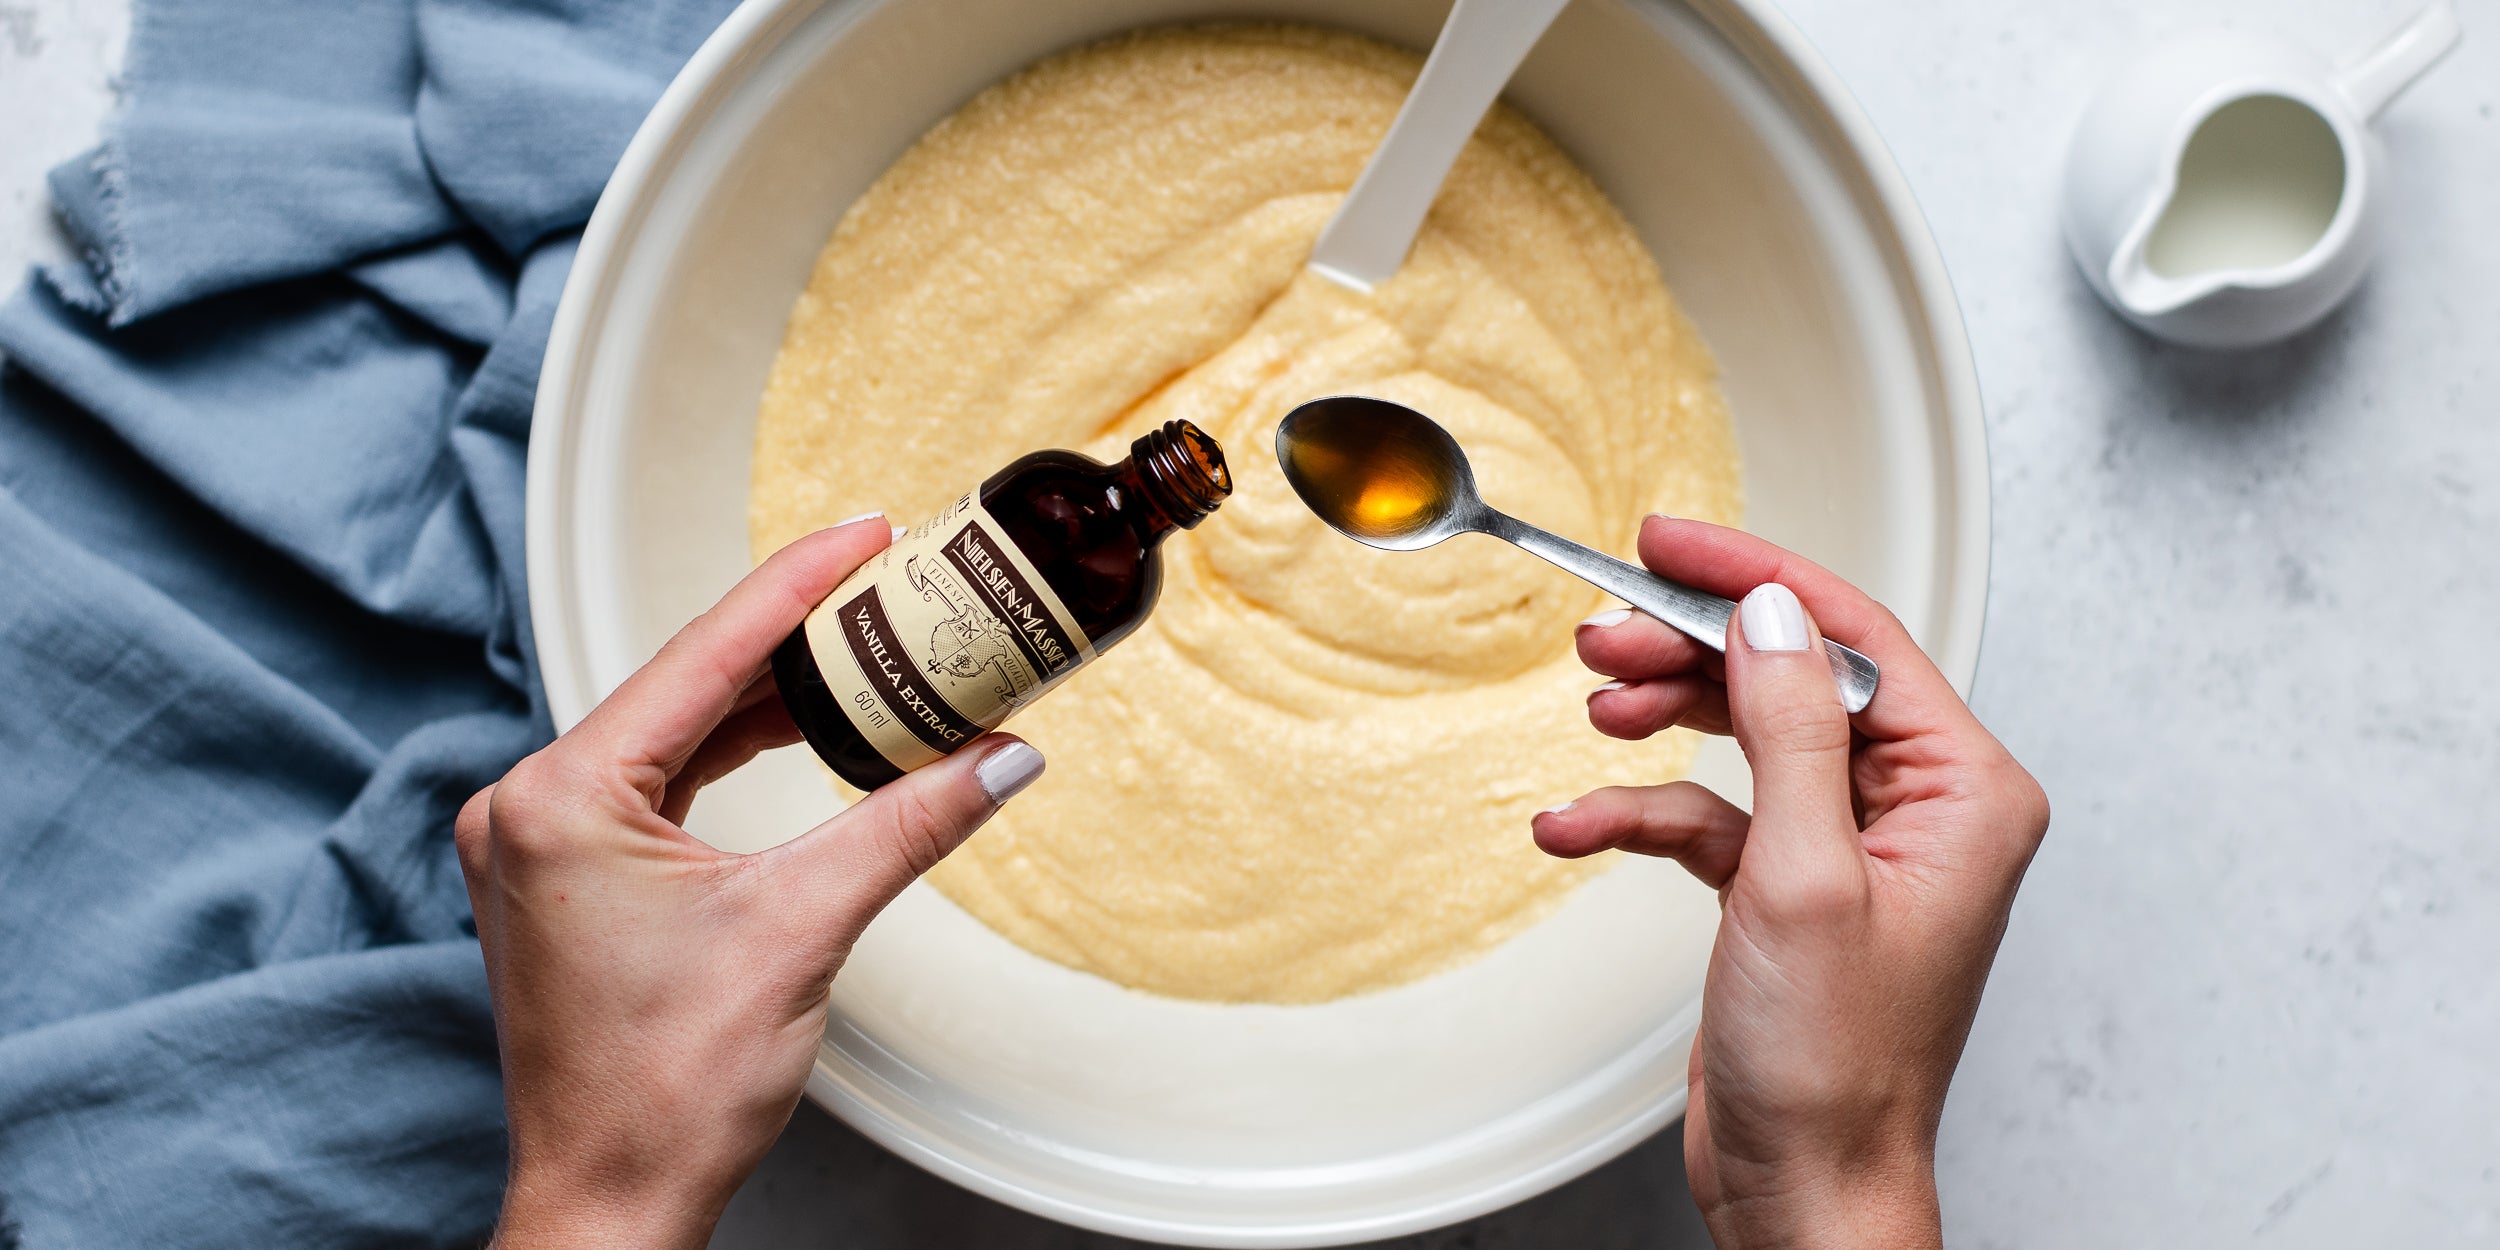 Hand pouring vanilla extract into a spoon over a bowl of cake mixture